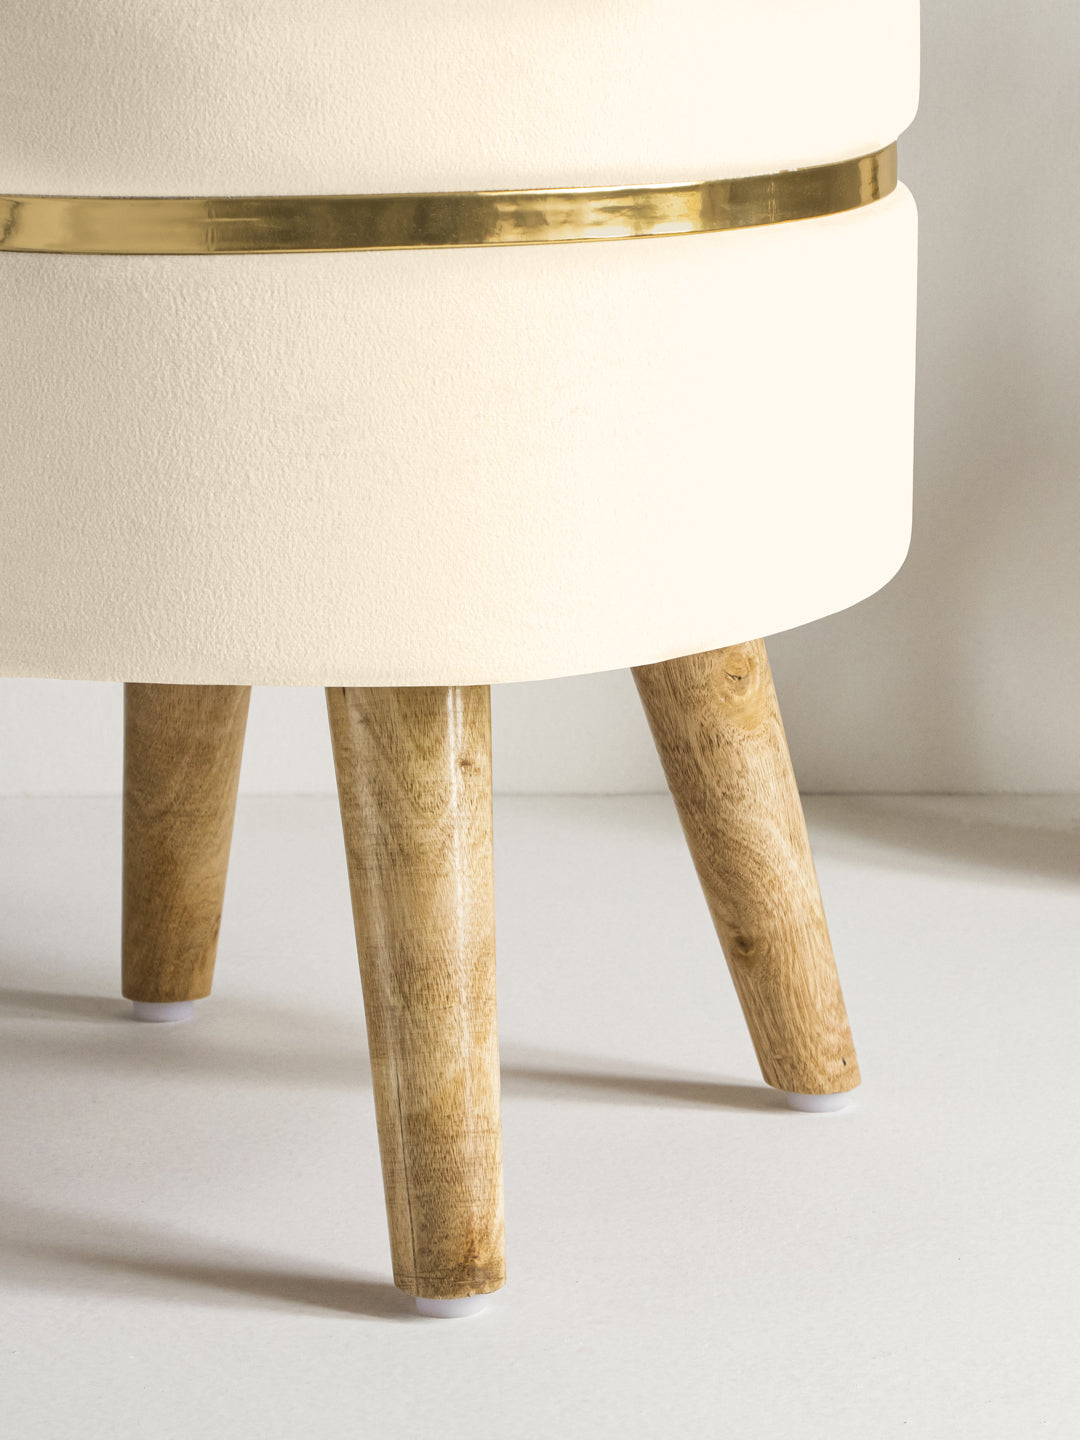 White Stool With Golden Ring & Wood Legs